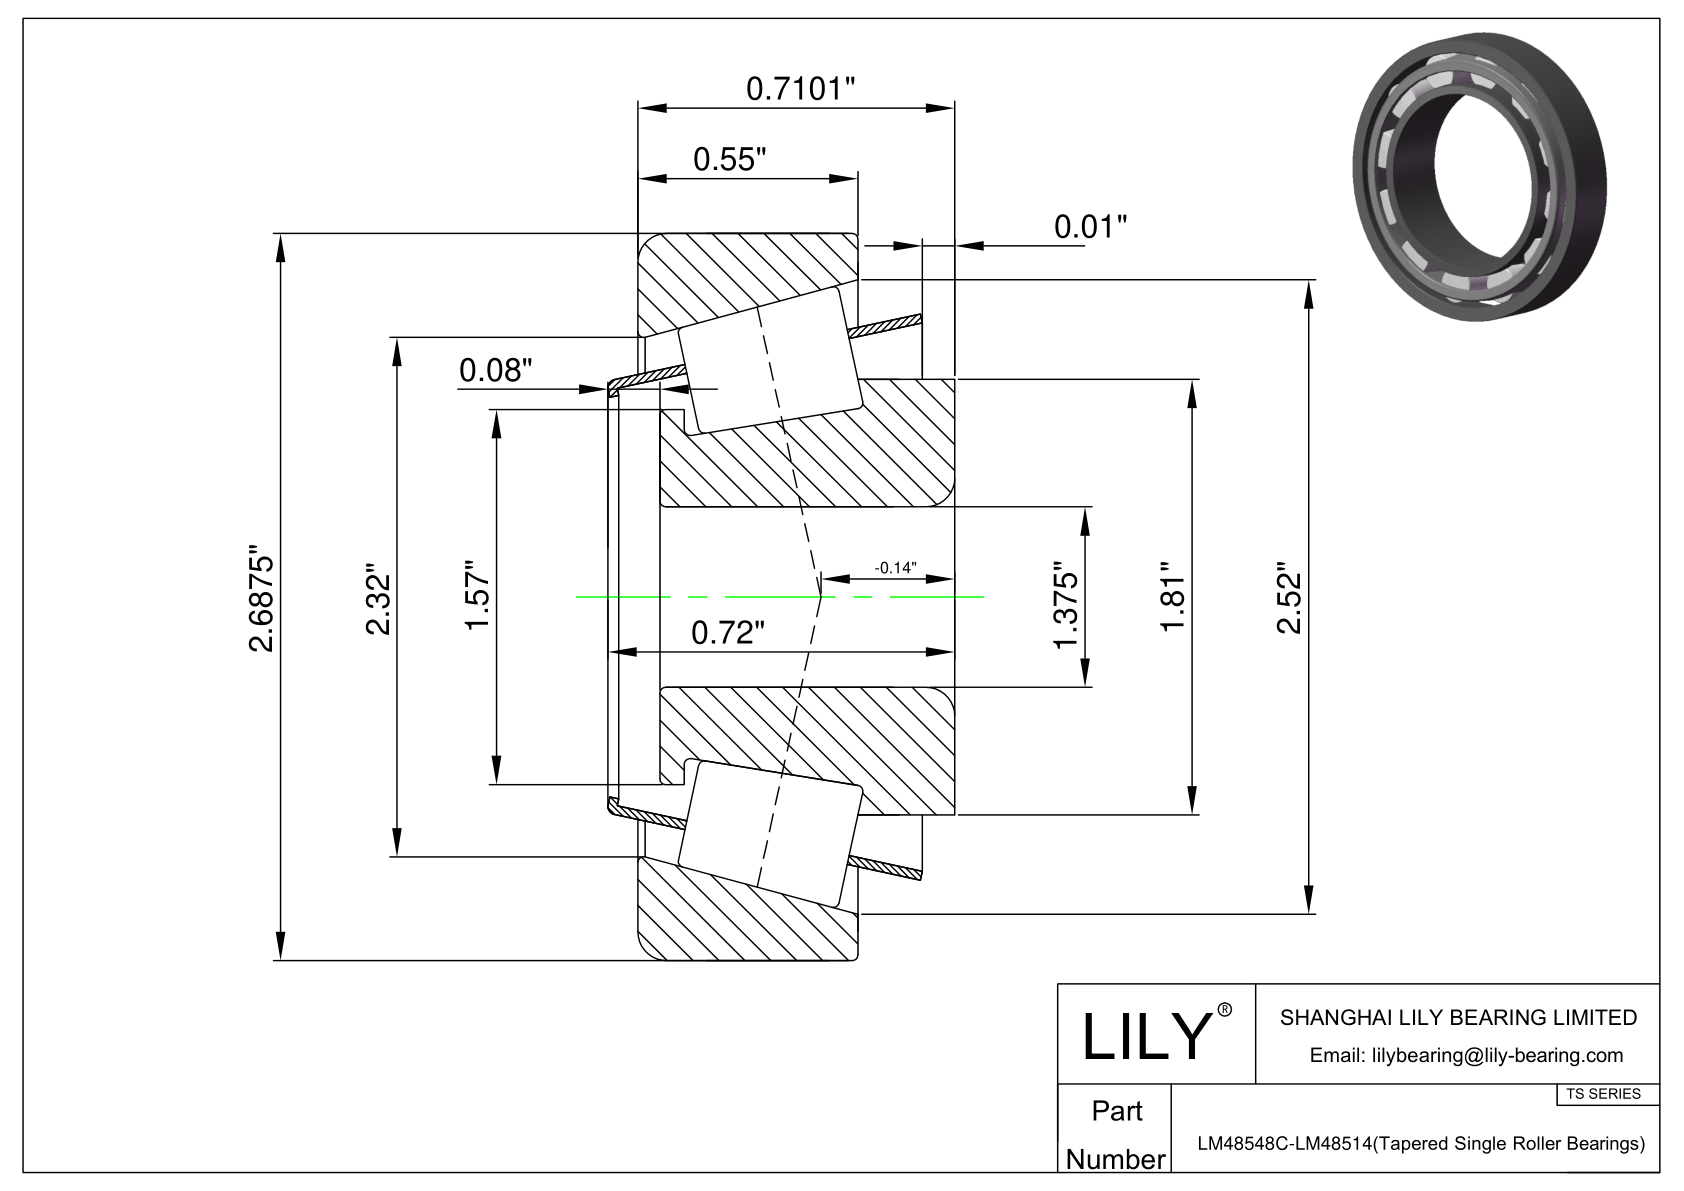 LM48548C-LM48514 TS (Tapered Single Roller Bearings) (Imperial) cad drawing